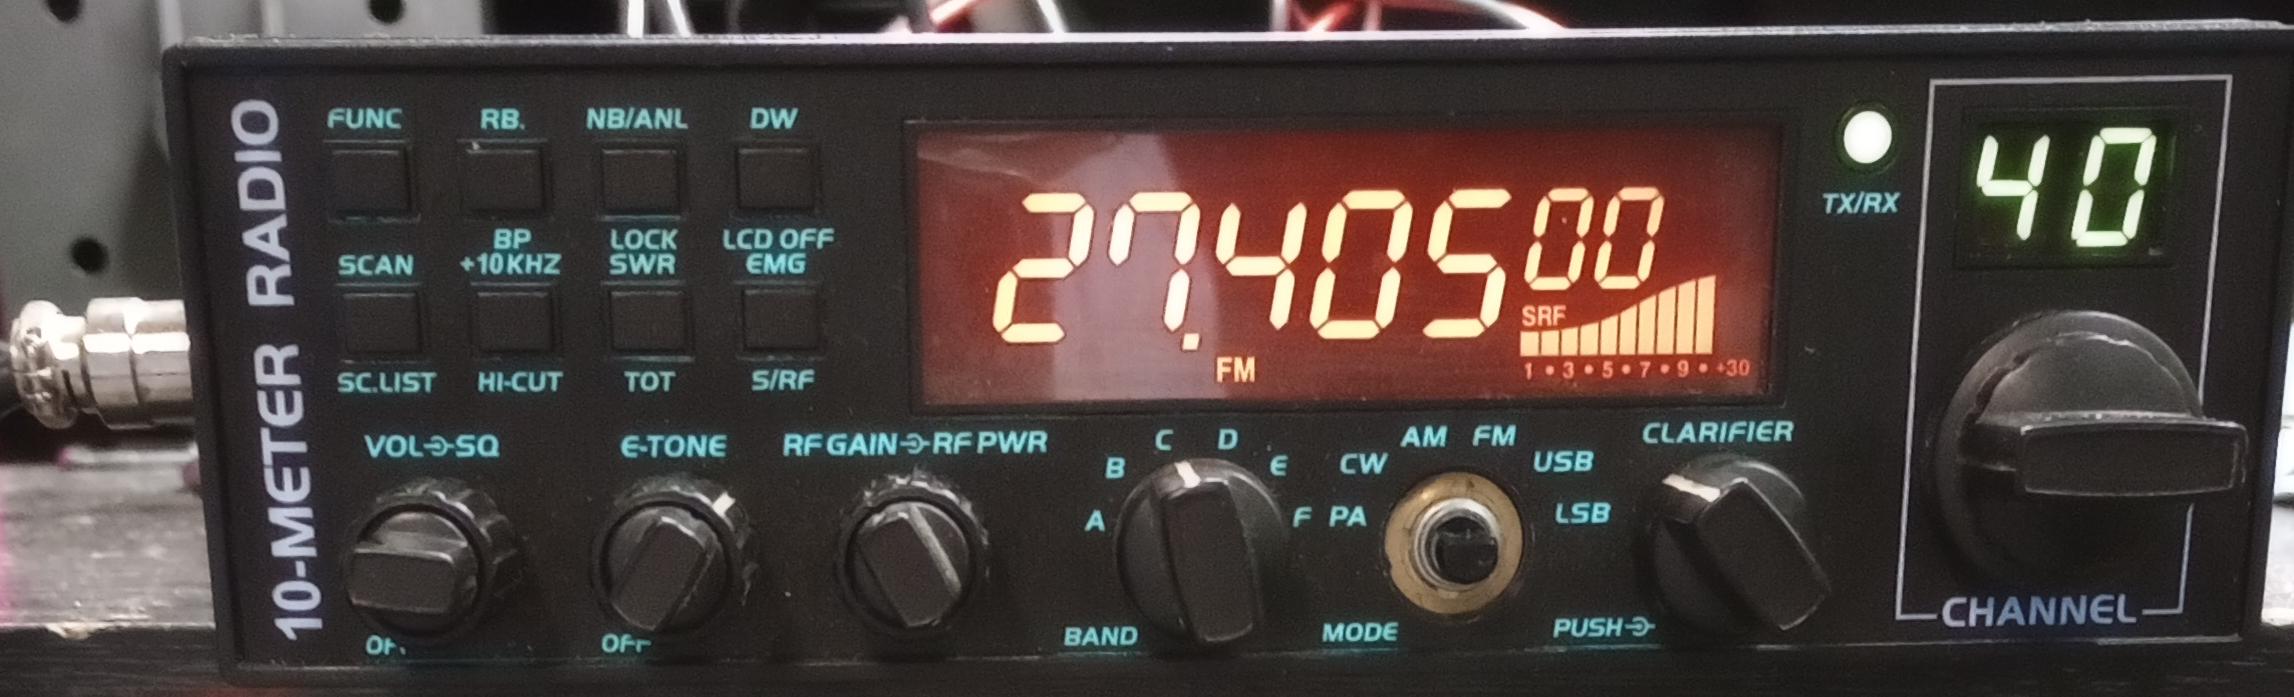 Front Of Radio receiving on the midband